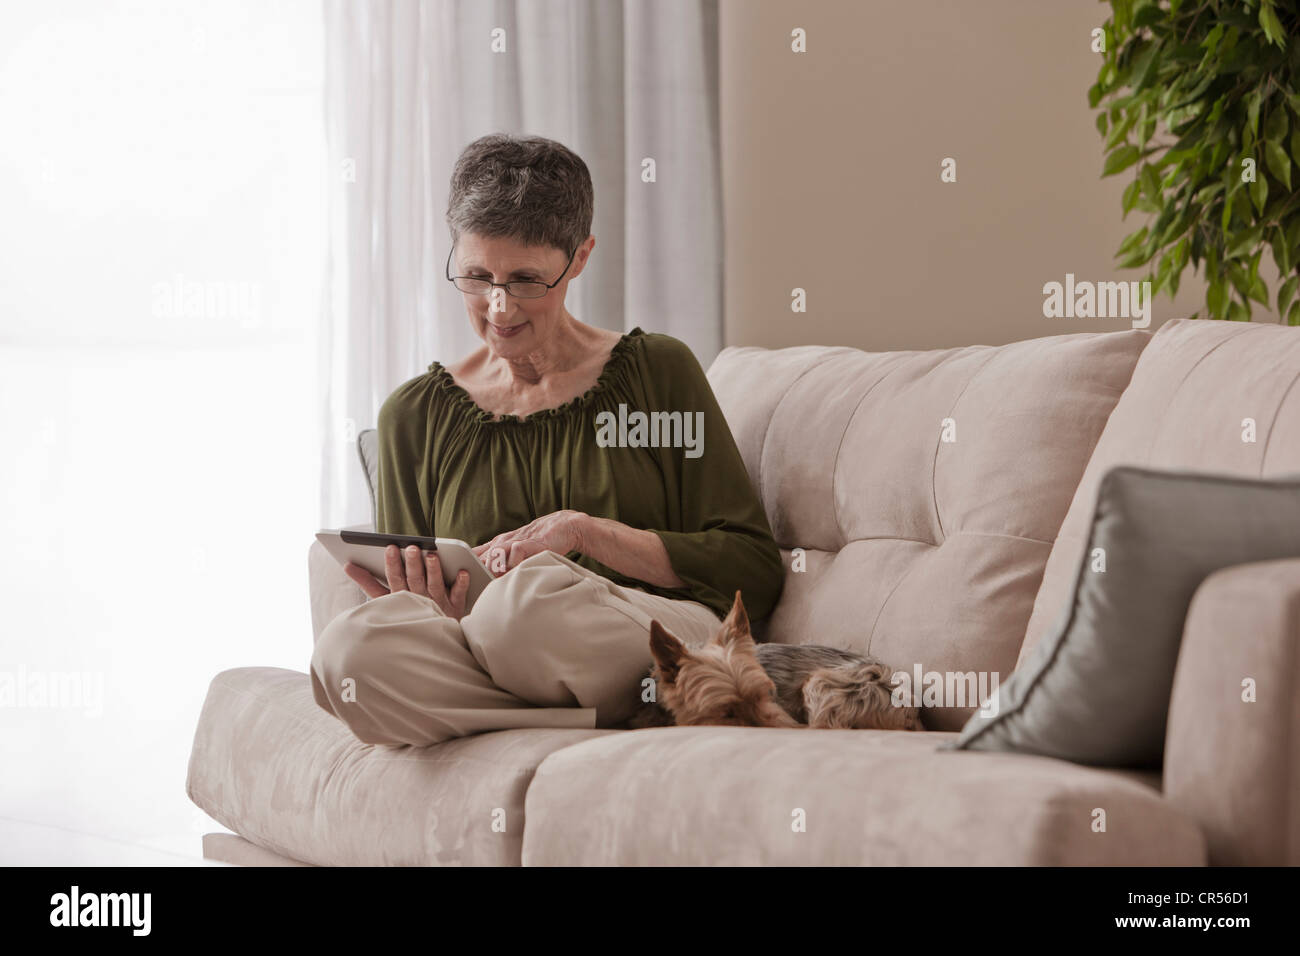 Caucasian woman using digital tablet on sofa with dog Stock Photo